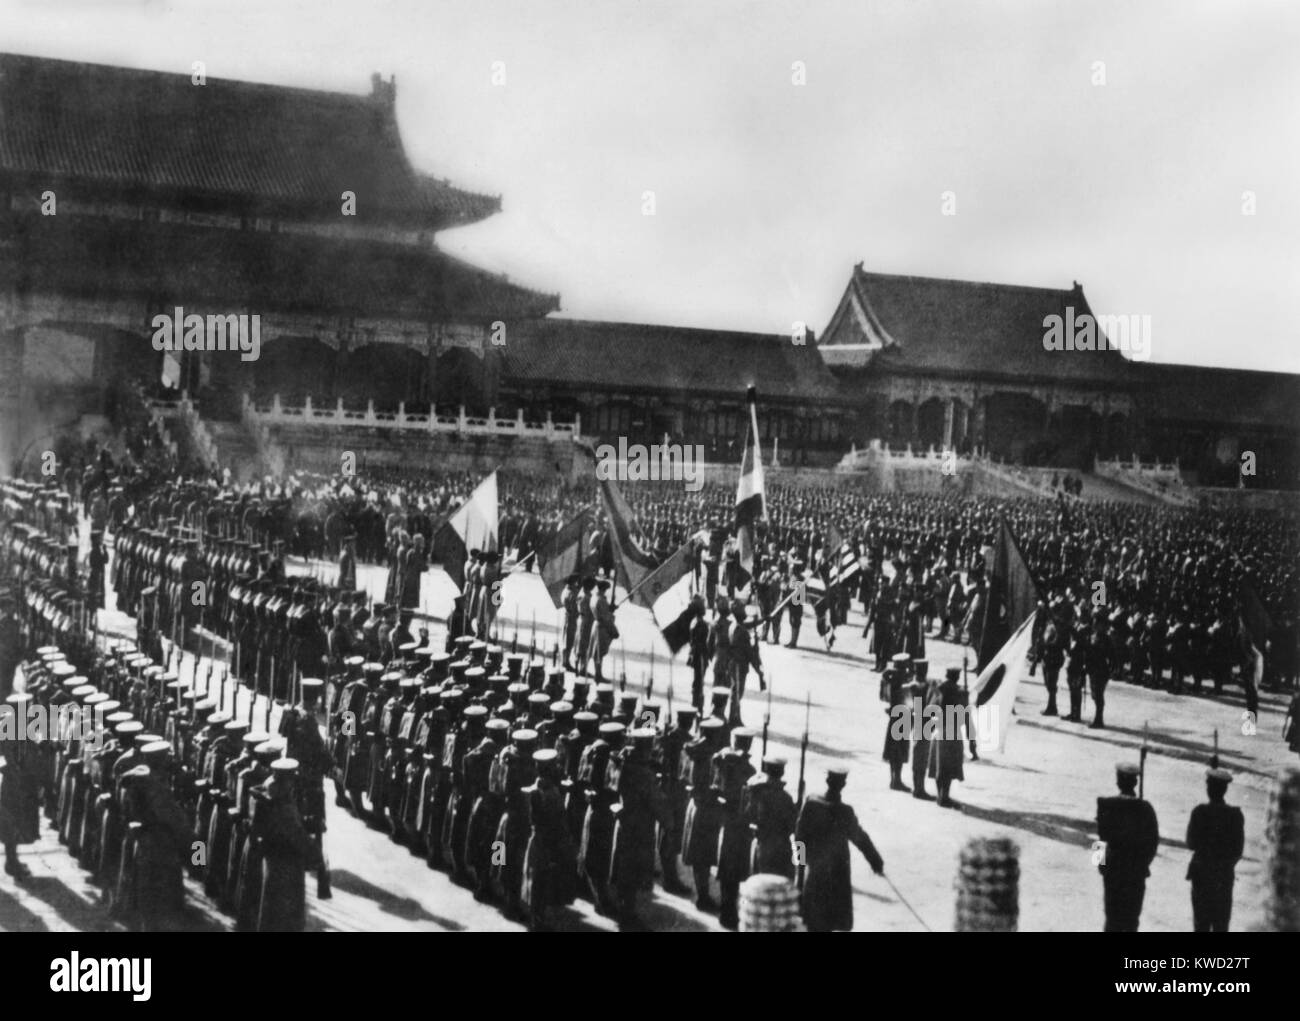 The Eight-Nation Alliance assembled in Beijing following the defeat of the Boxer Rebellion. Within historic grounds of the Forbidden City in Peking, China, the Allies celebrated victory on Nov. 28, 1900. Immediately identifiable flags in picture: Italy, France, Germany, Russia and Japan  (BSLOC 2017 20 31) Stock Photo